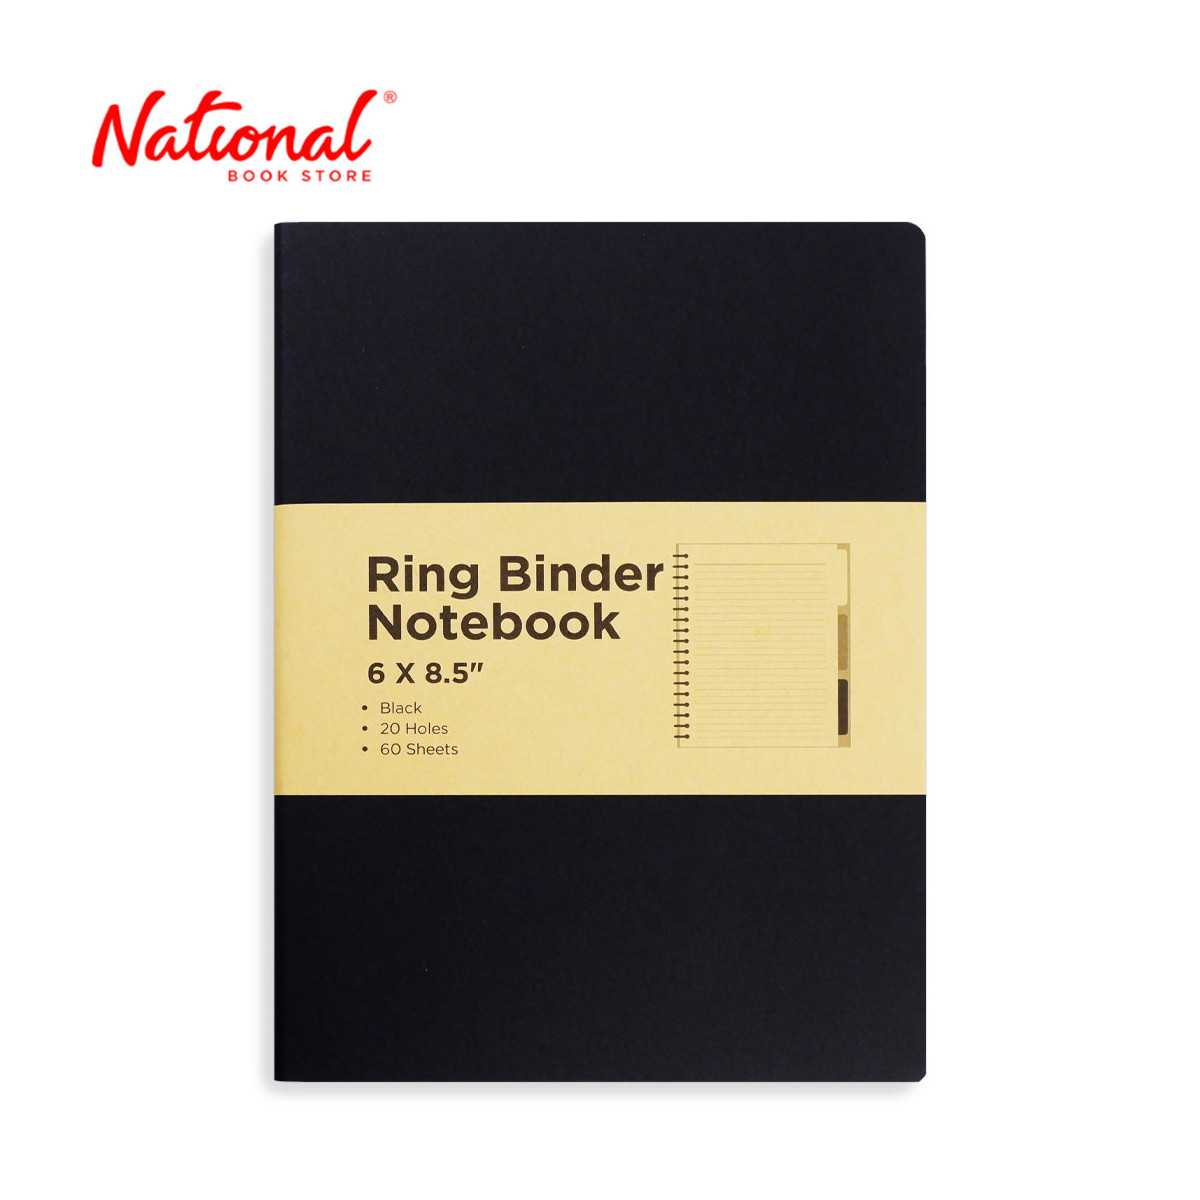 Premiere Notes 20Holes Ring Binder Notebook 6x8.5 inches 60 Sheets - Black - School Supplies